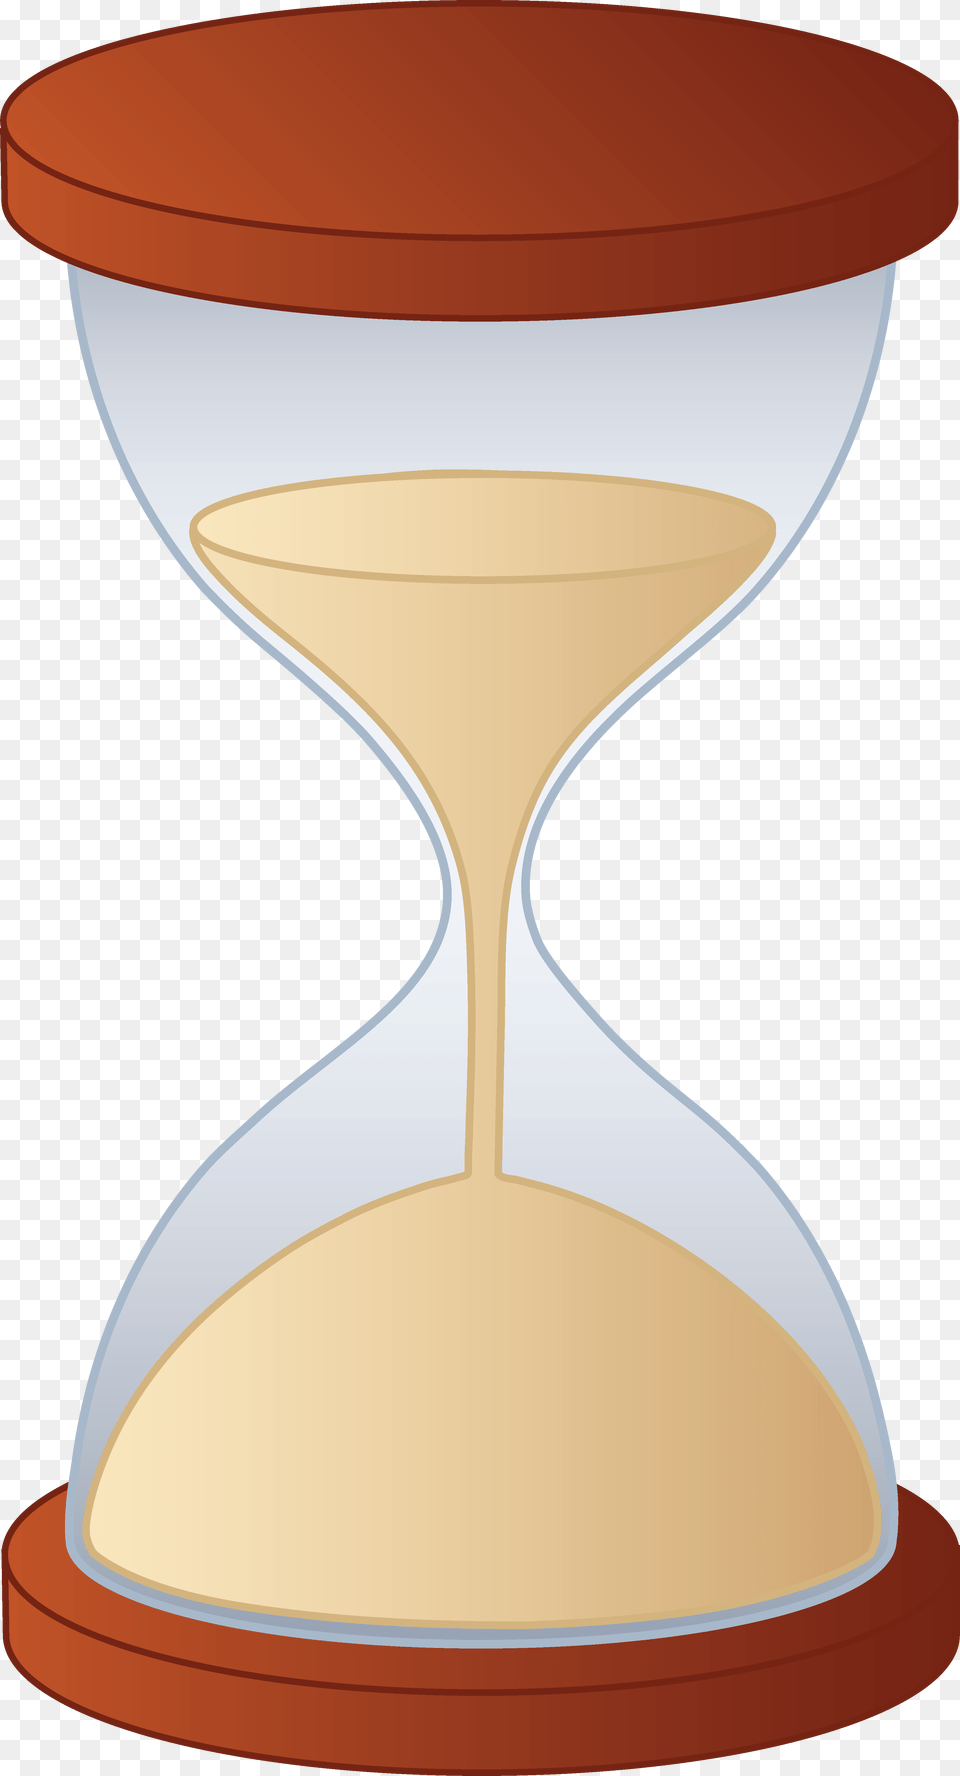 Hourglass Design Free Png Download